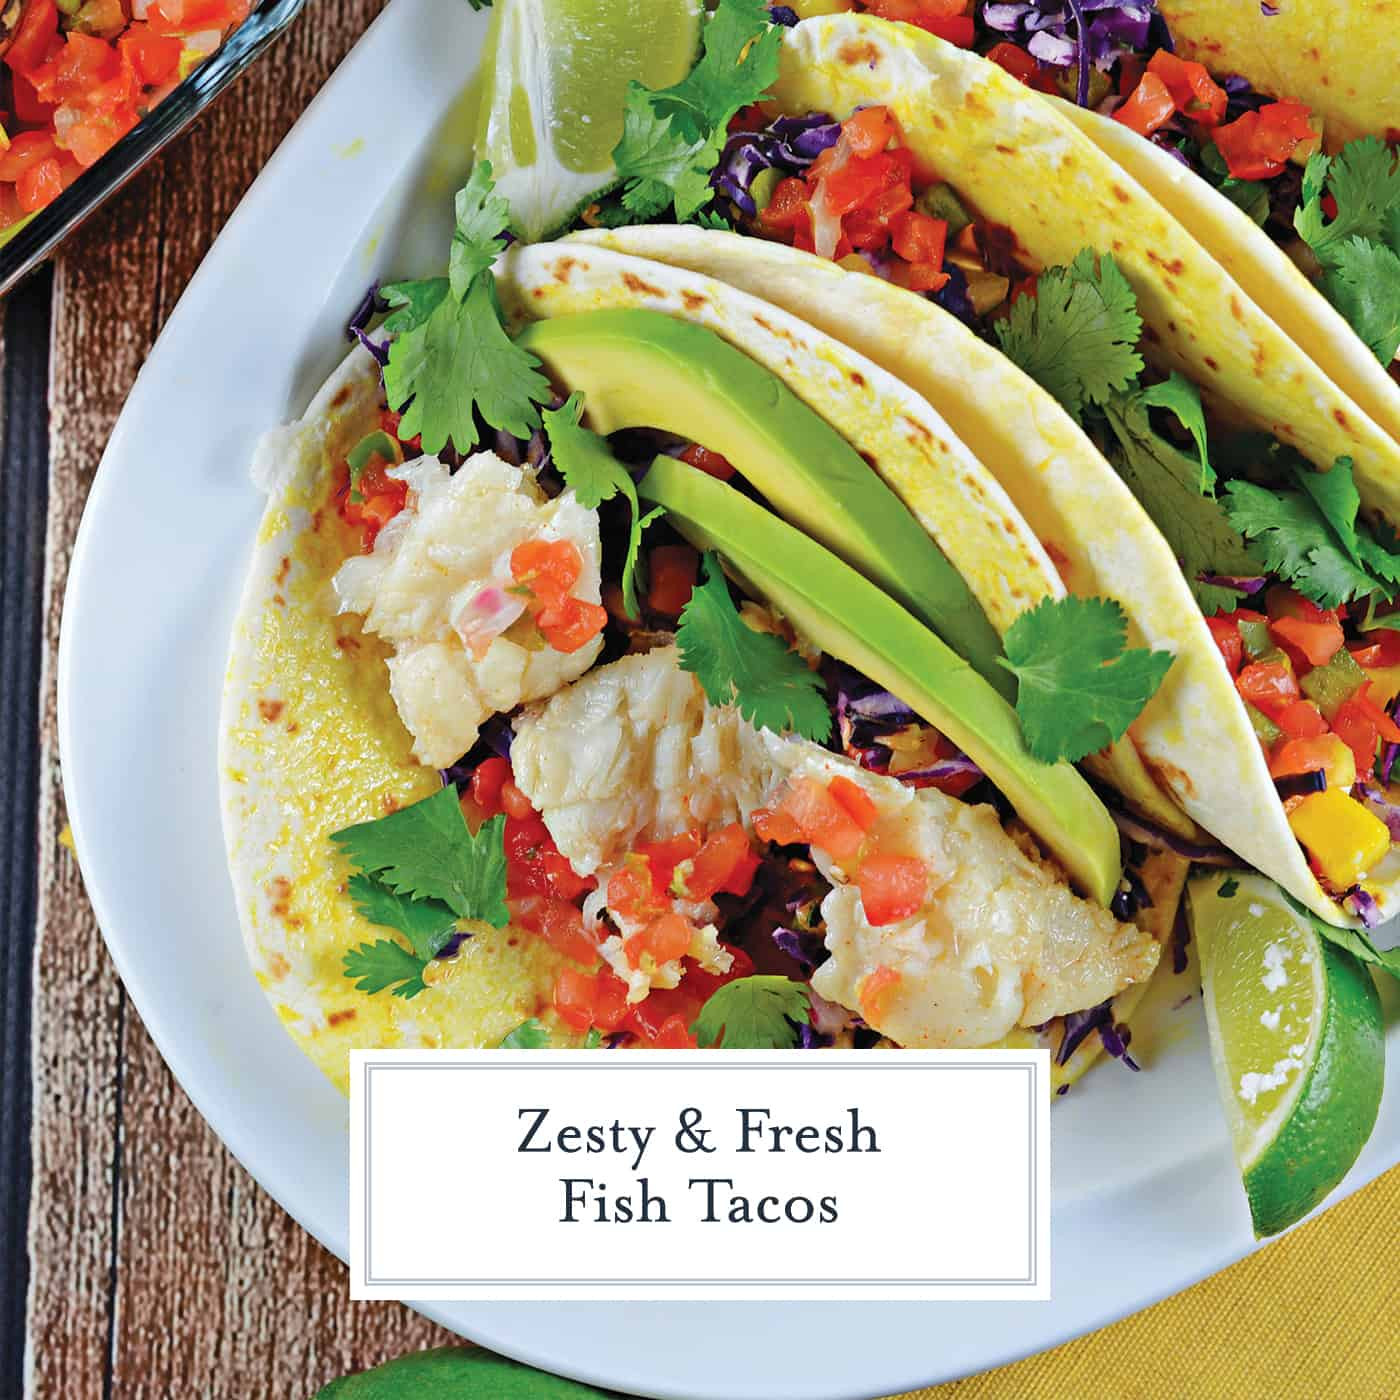 Recipes For Fish Taco Sauce
 Fish Tacos Recipe with Tropical Salsa and Homemade Hot Sauce